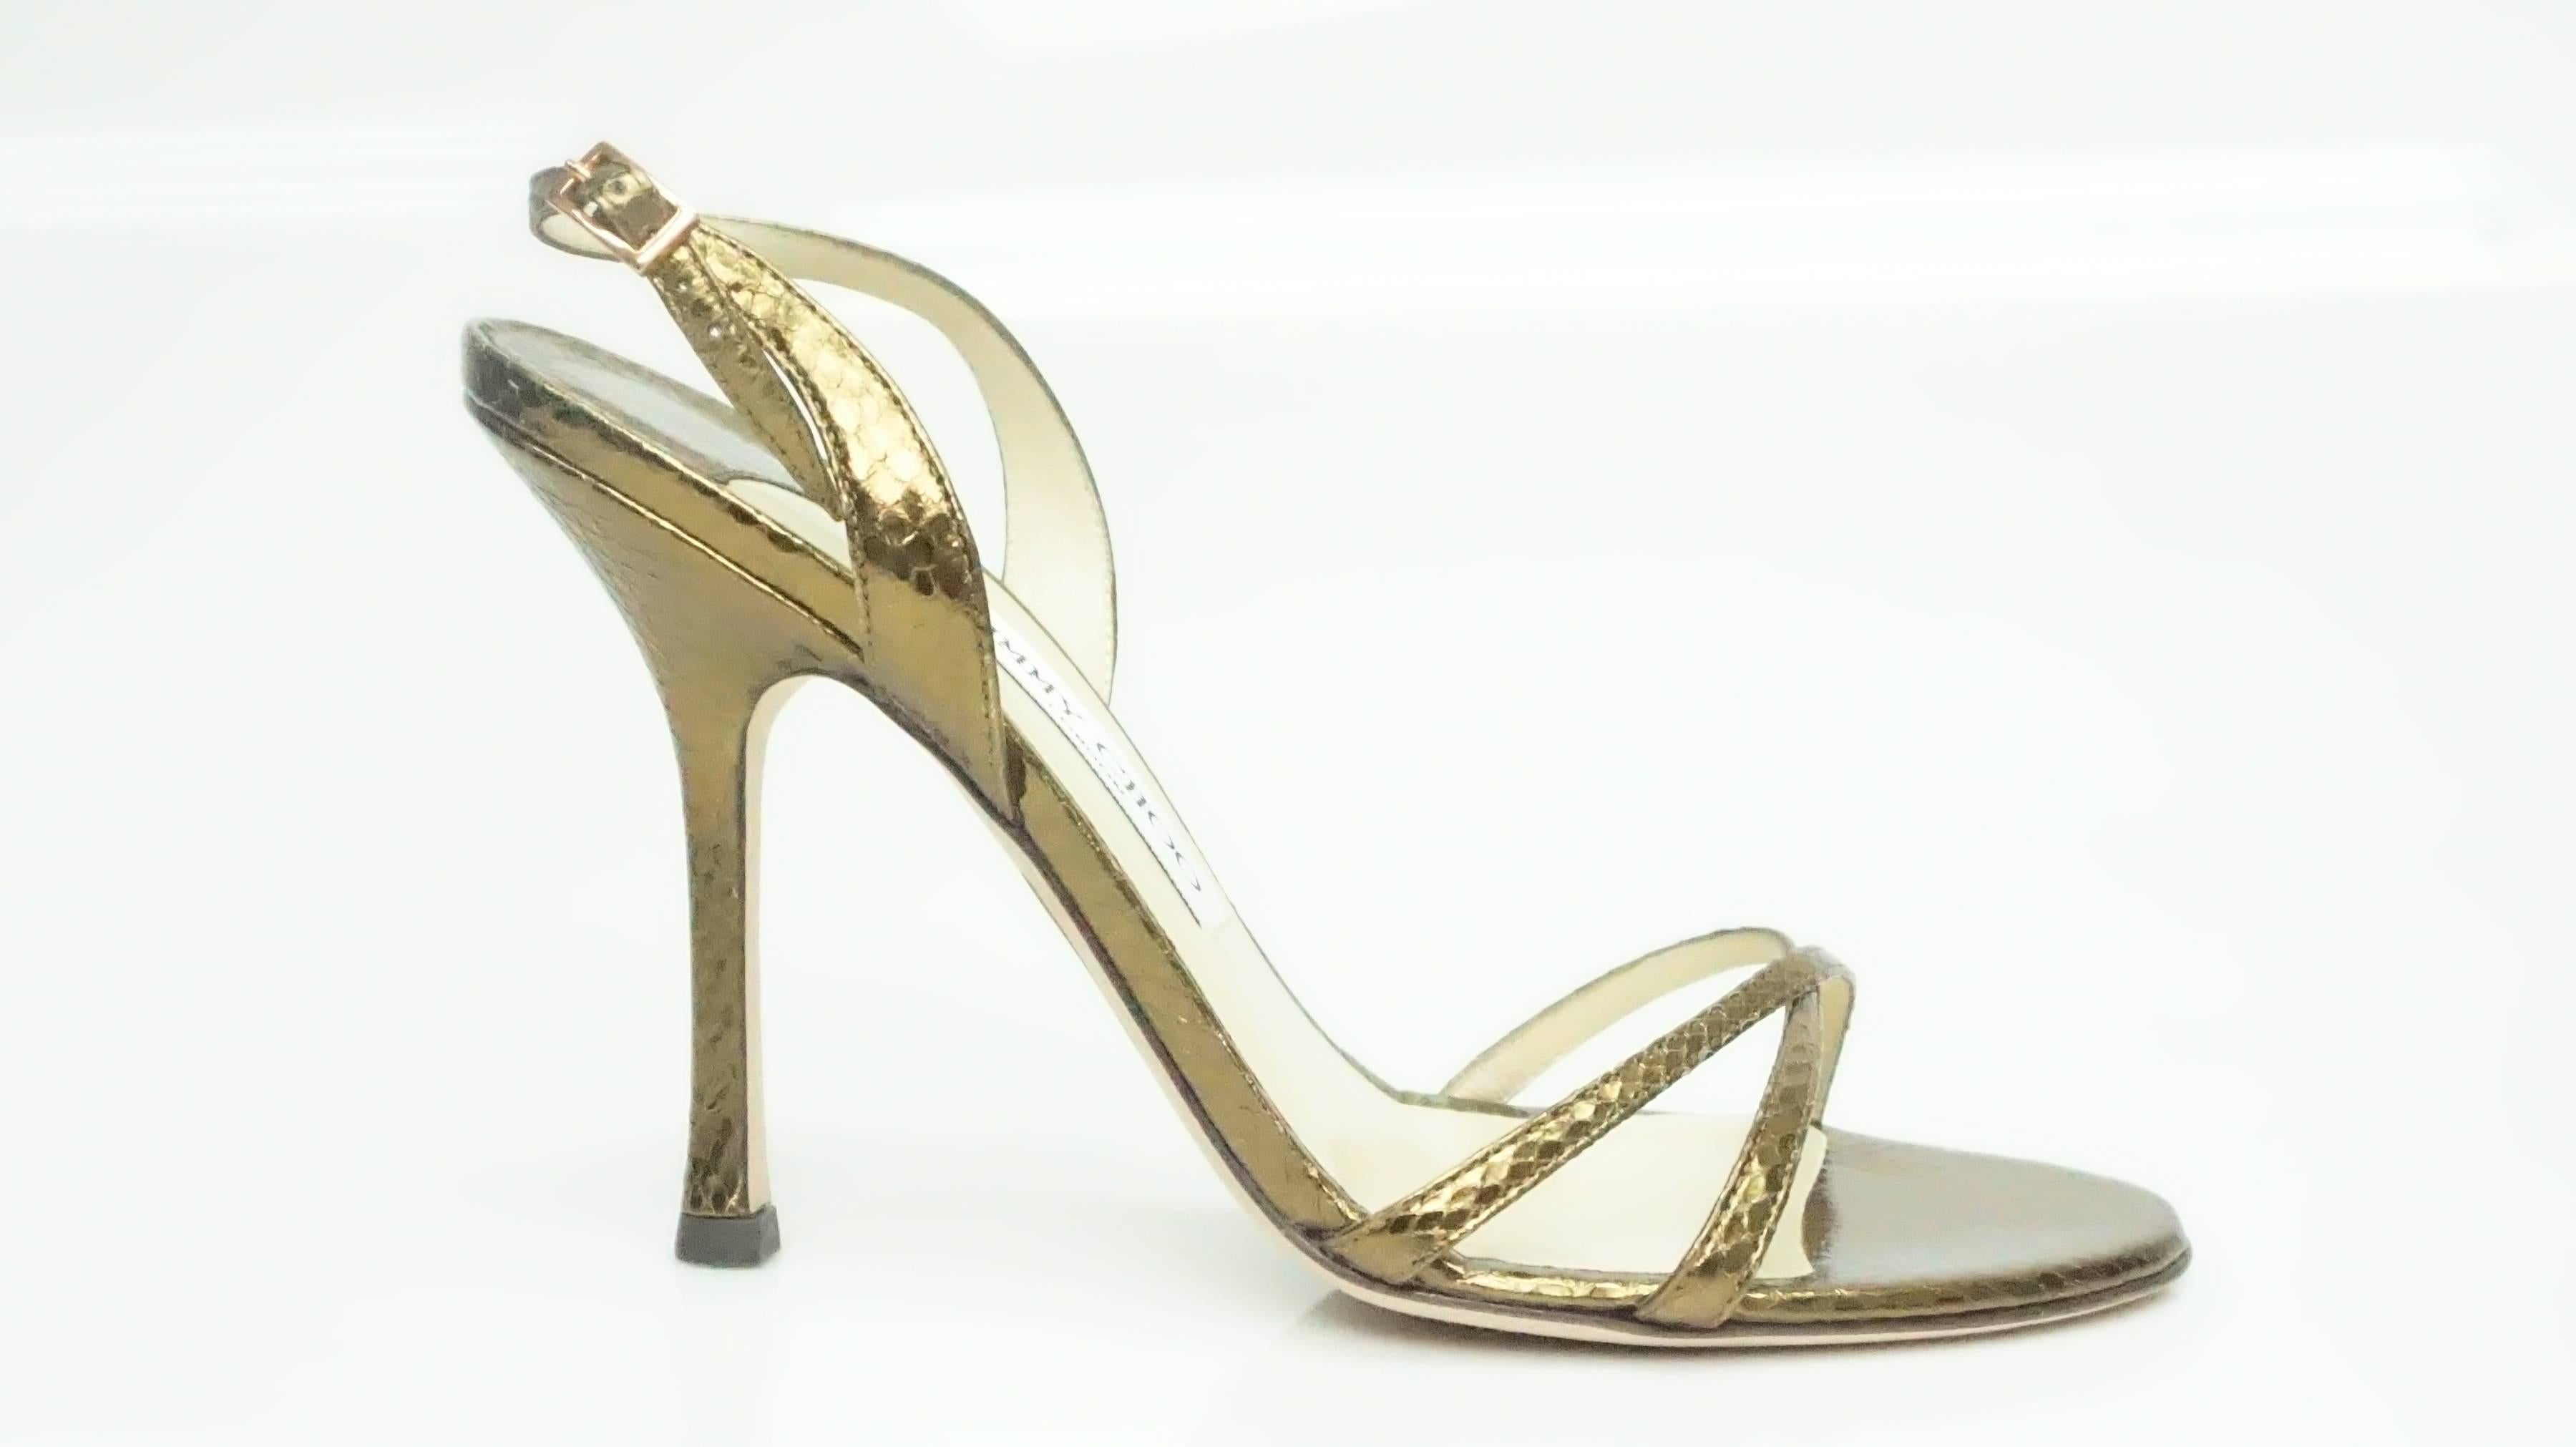 Jimmy Choo Watersnake Copper Strappy Heel - 39 These beautiful water snake heel is in excellent condition. These appear to be never been worn. The front of the shoe has a criss cross effect and there is a slingback on the back. The entire shoe is